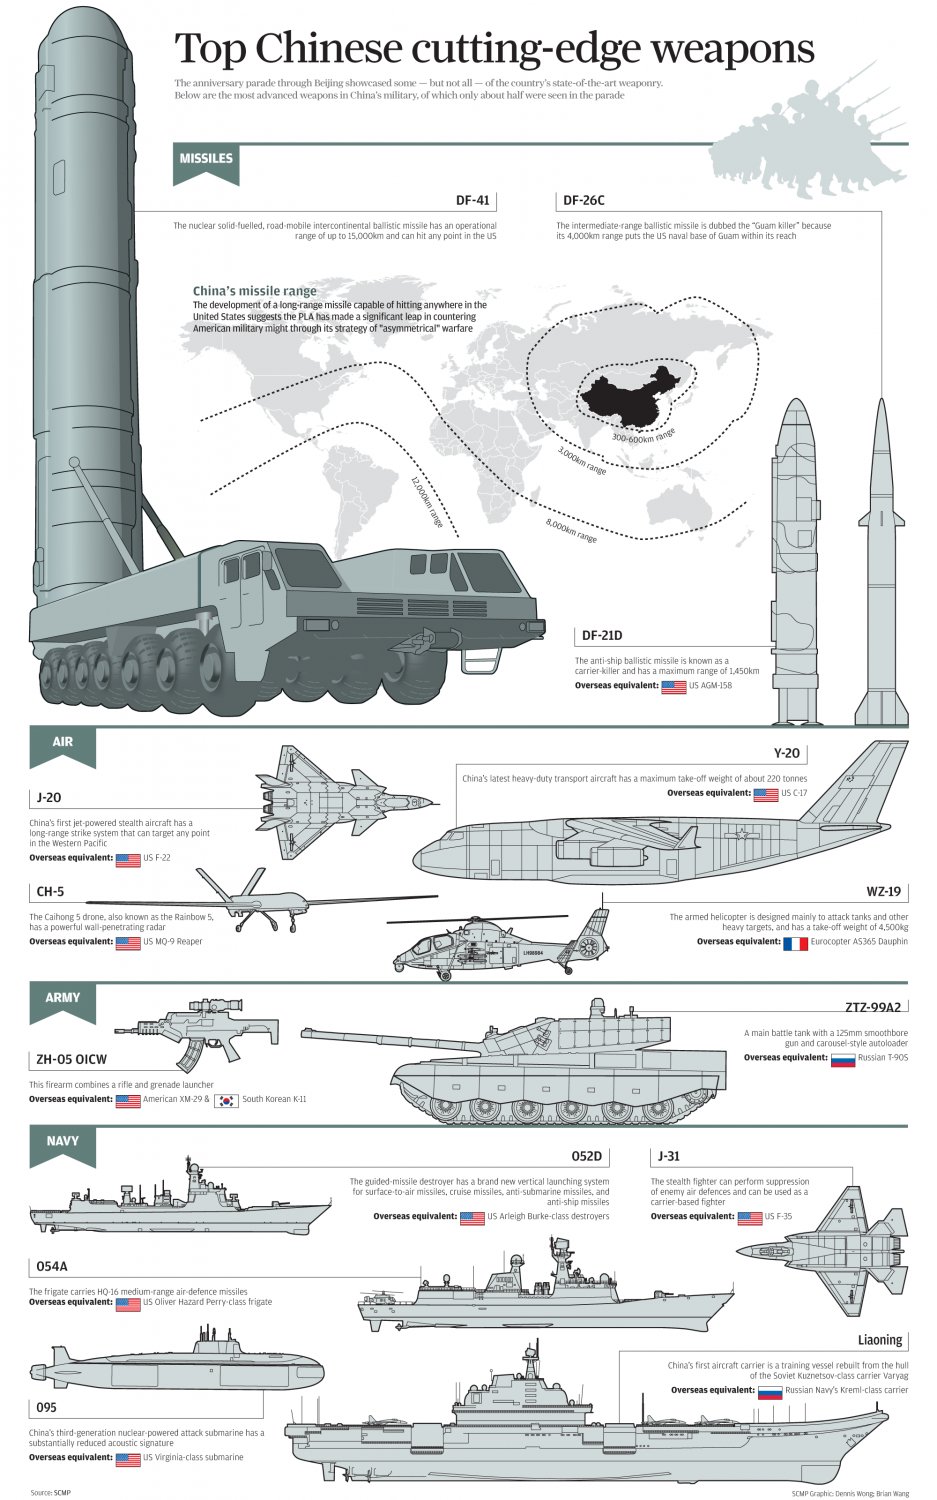 Top Chinese Cutting-Edge Weapons Chart  13"x19" (32cm/49cm) Polyester Fabric Poster